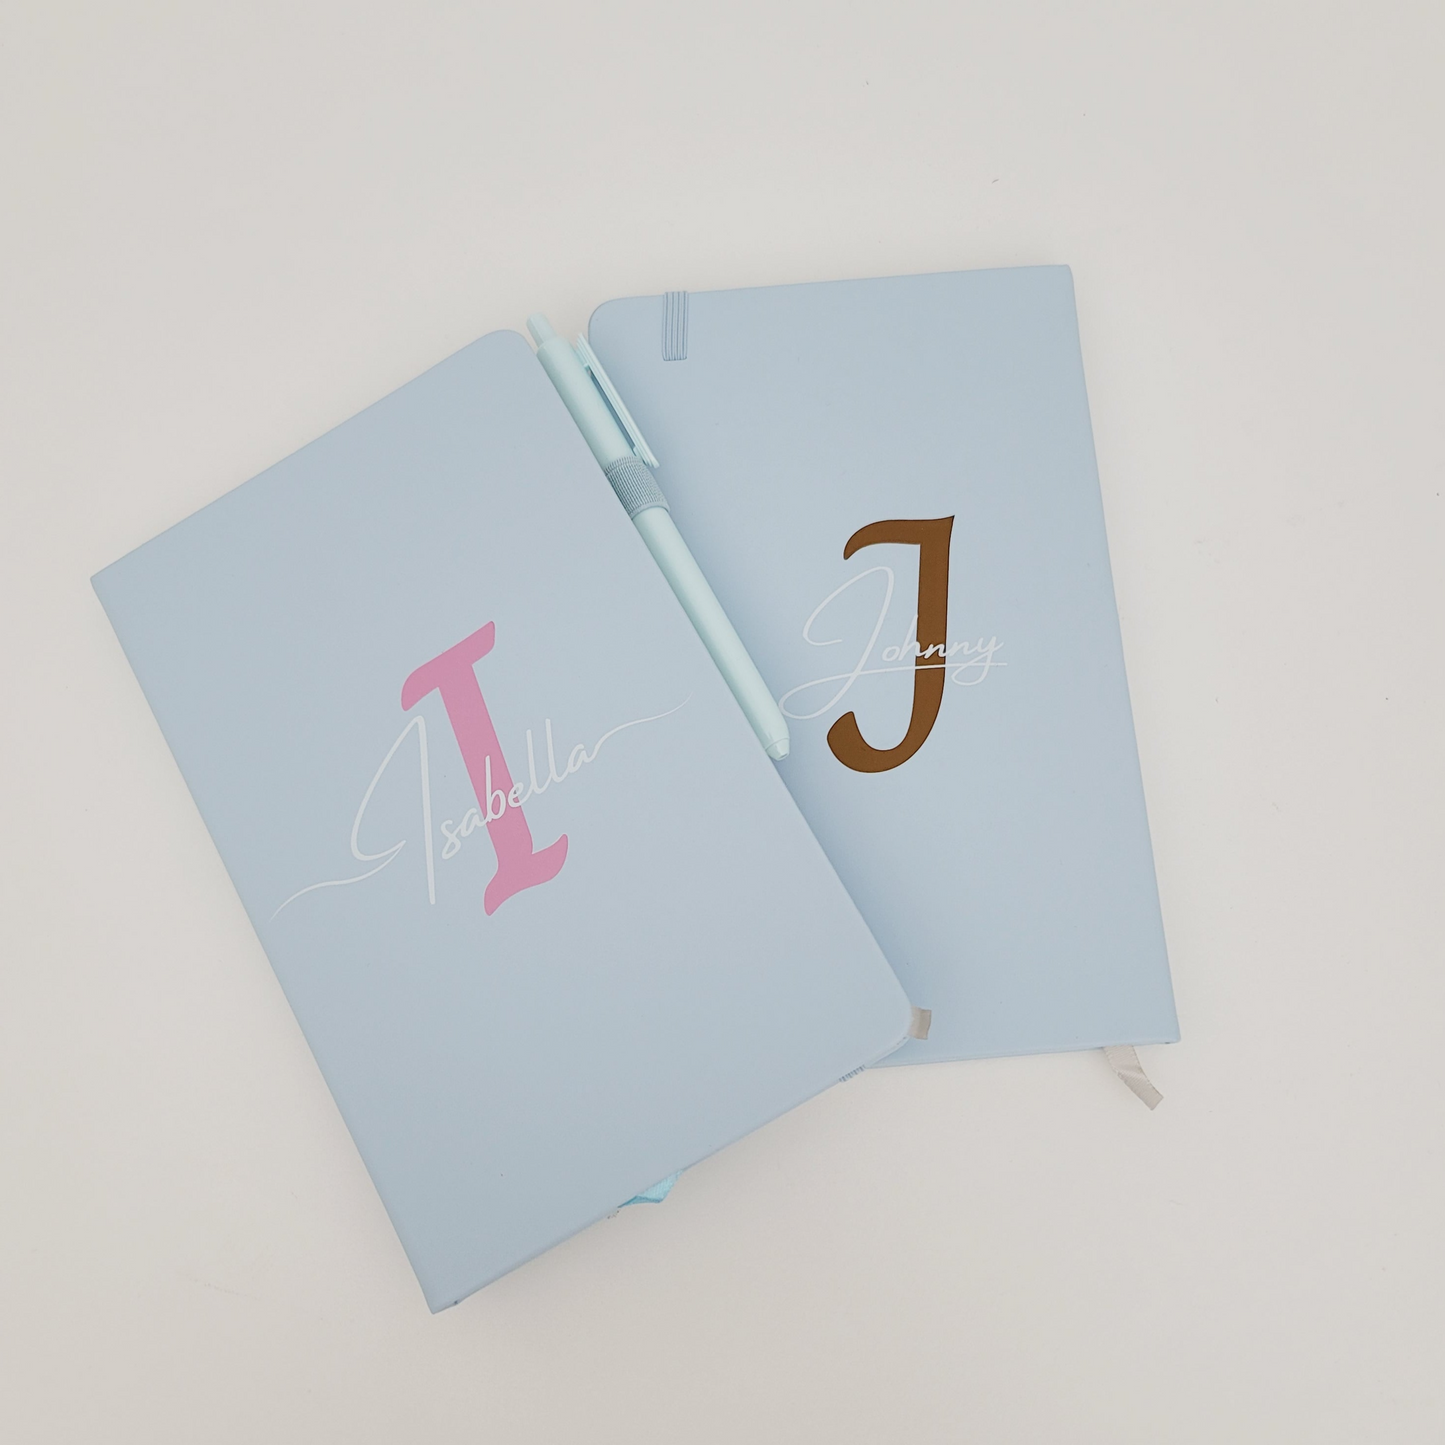 Personalized Name and Large Initial Notebook with Pen